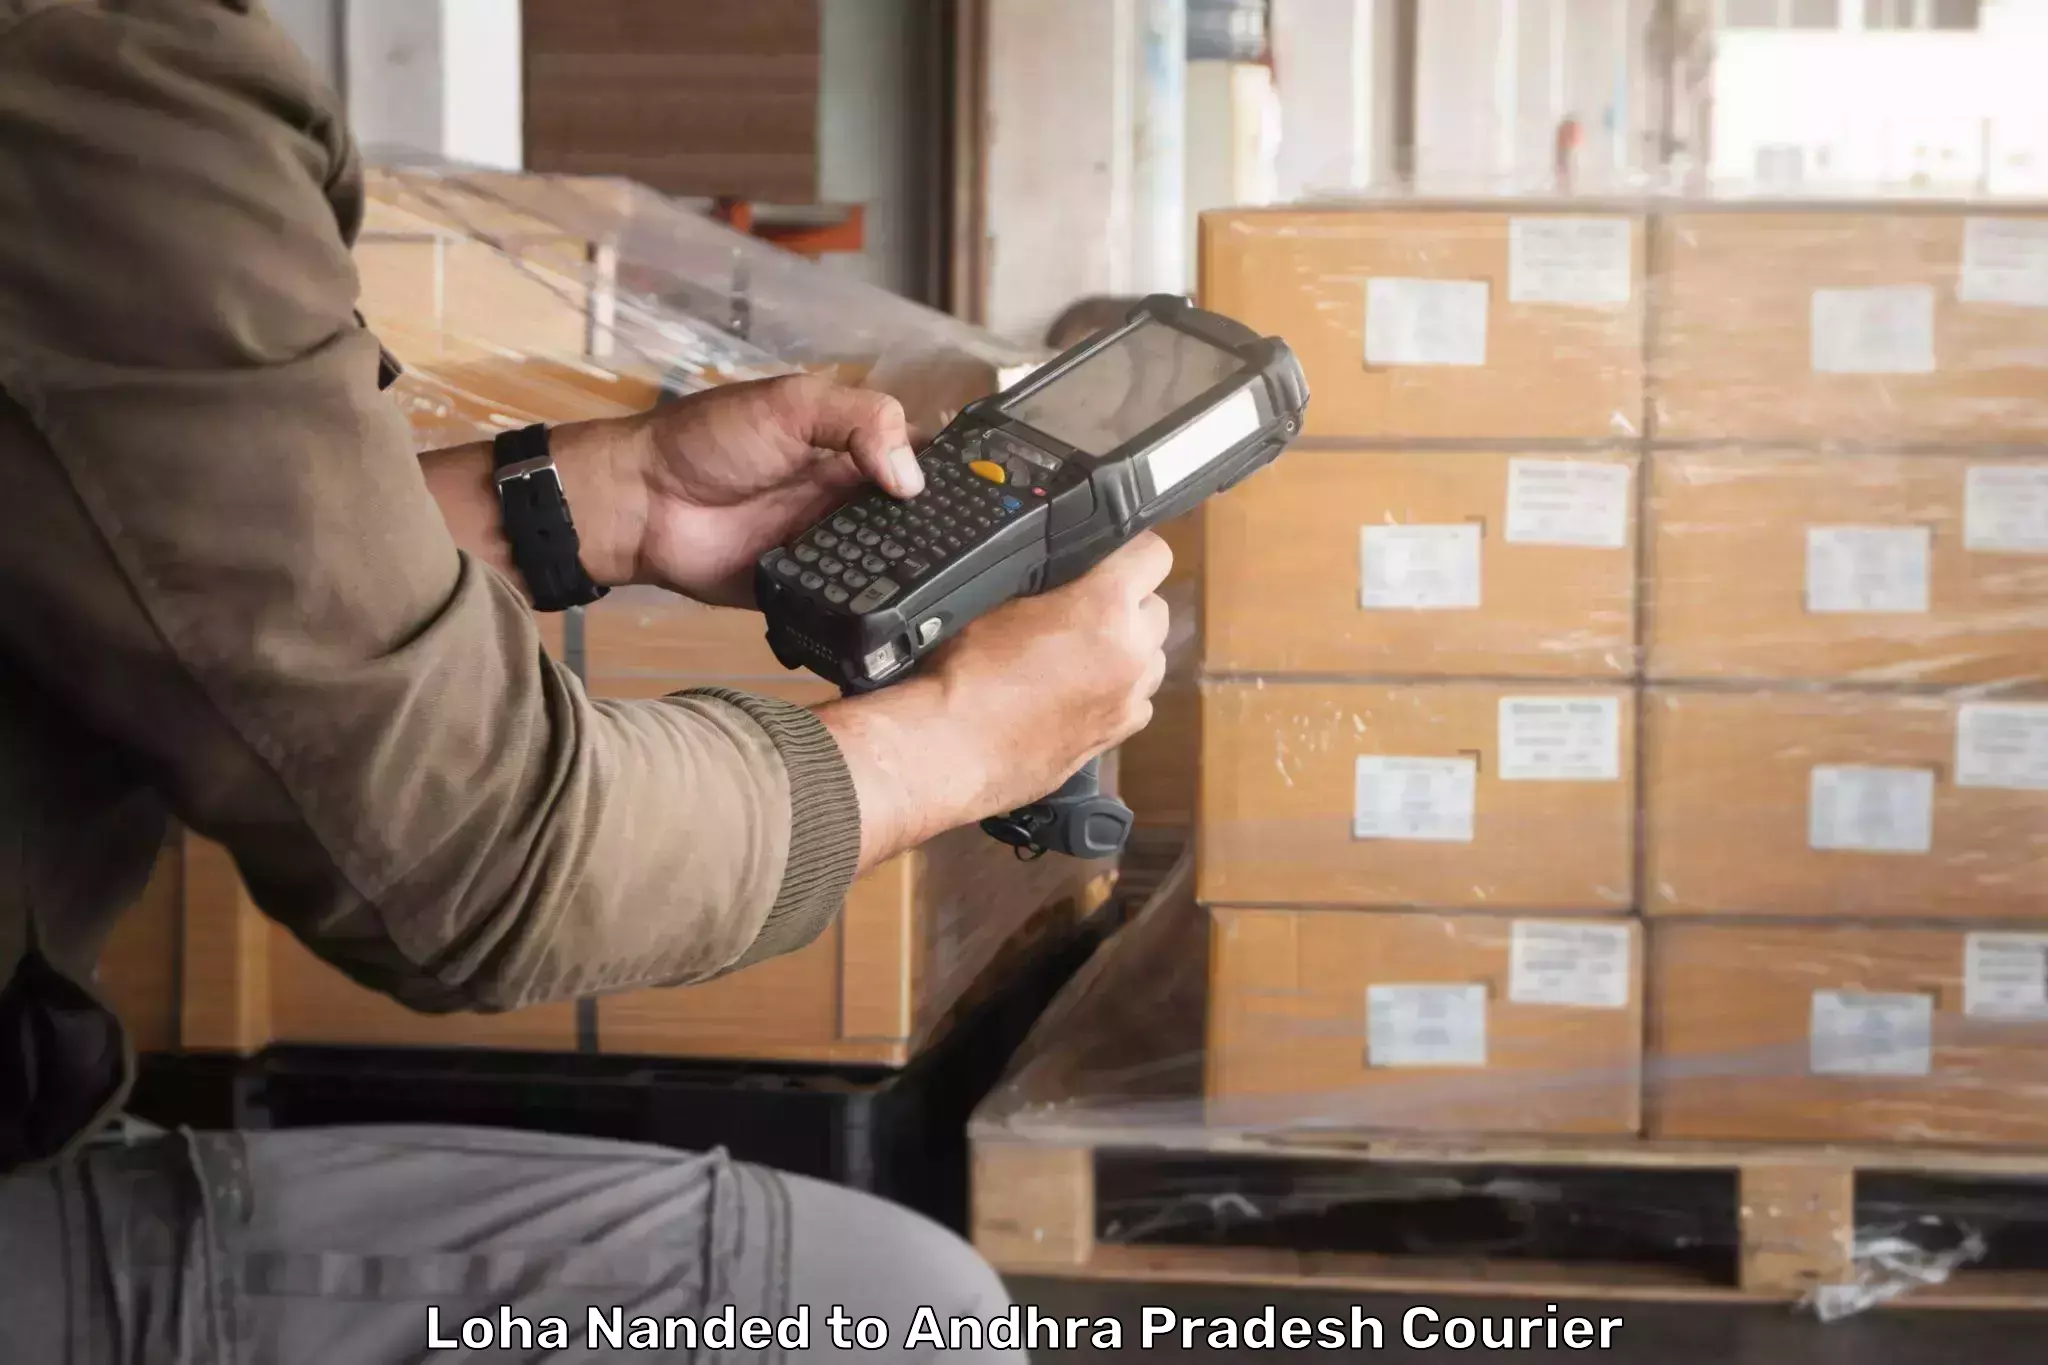 Global courier networks Loha Nanded to Chagallu